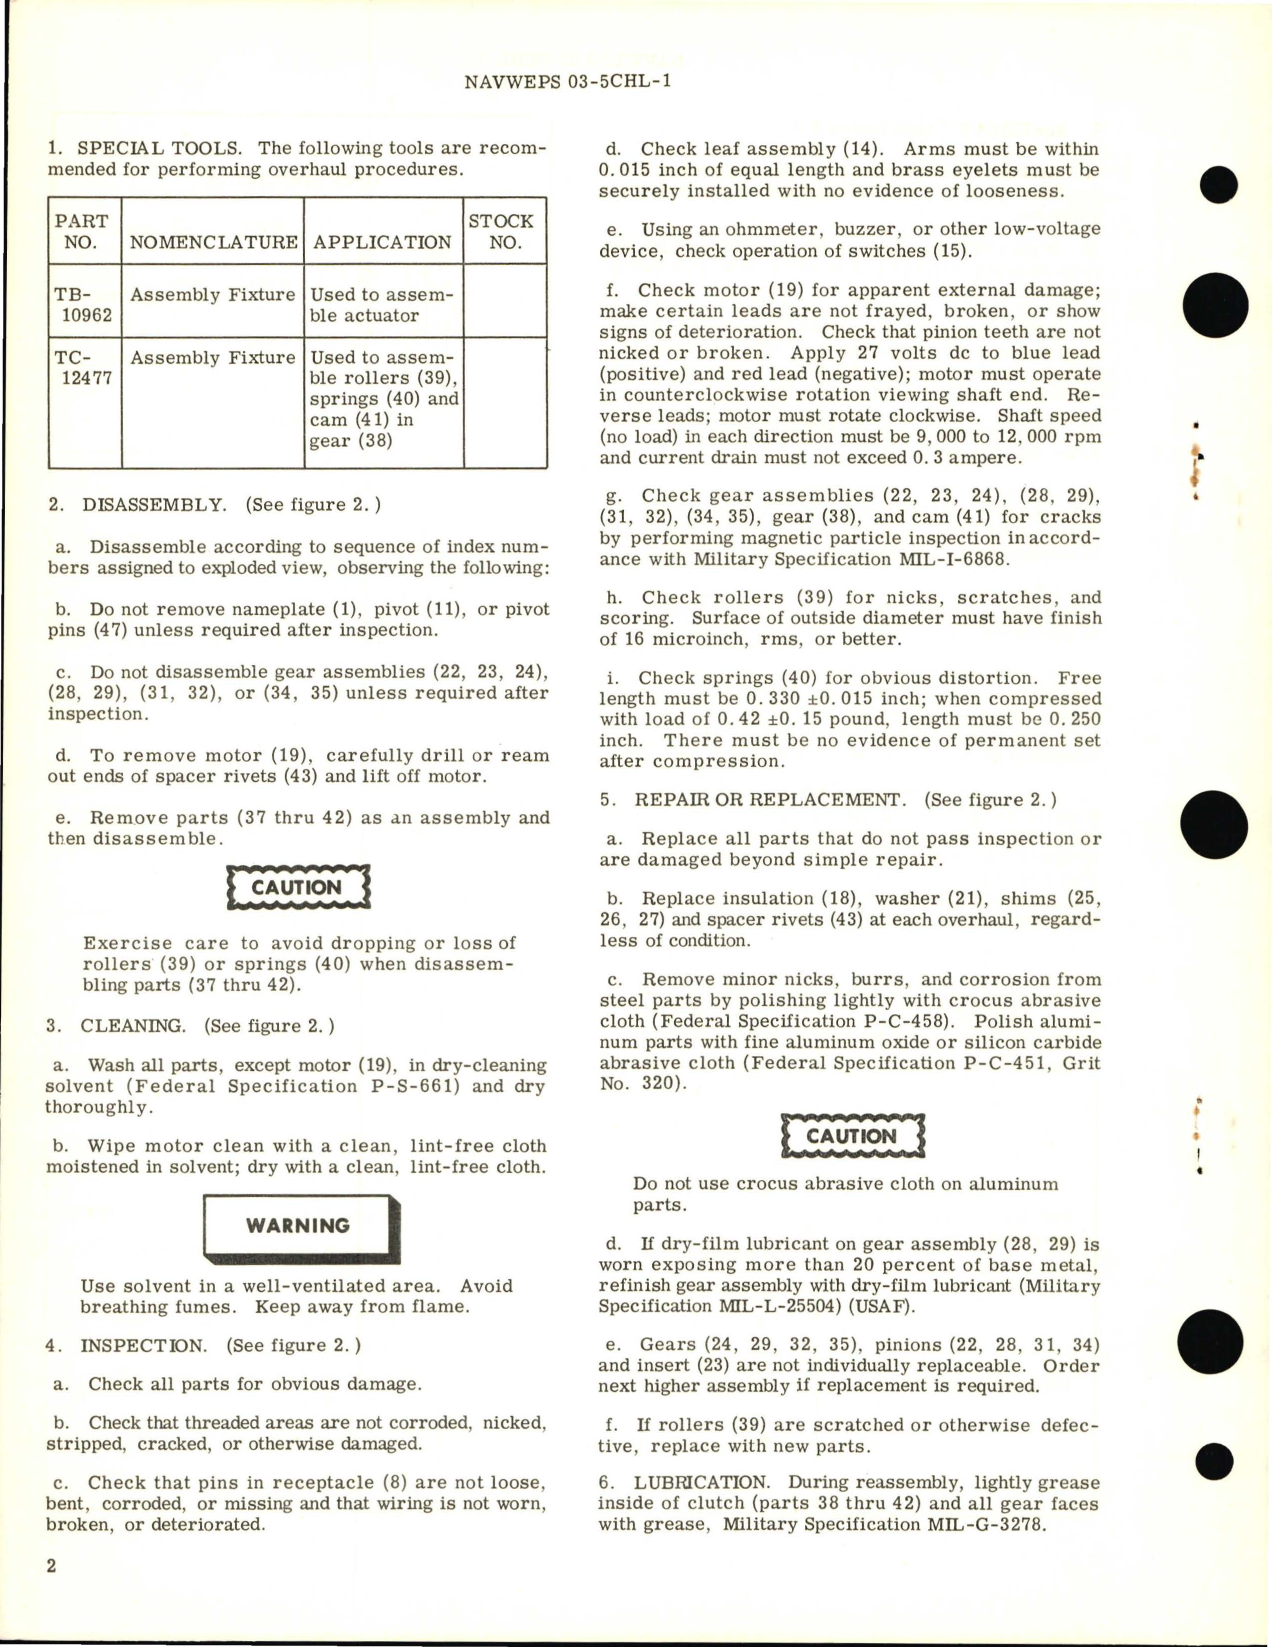 Sample page 2 from AirCorps Library document: Overhaul Instructions with Parts Breakdown for Rotary Actuator Assembly 617712A